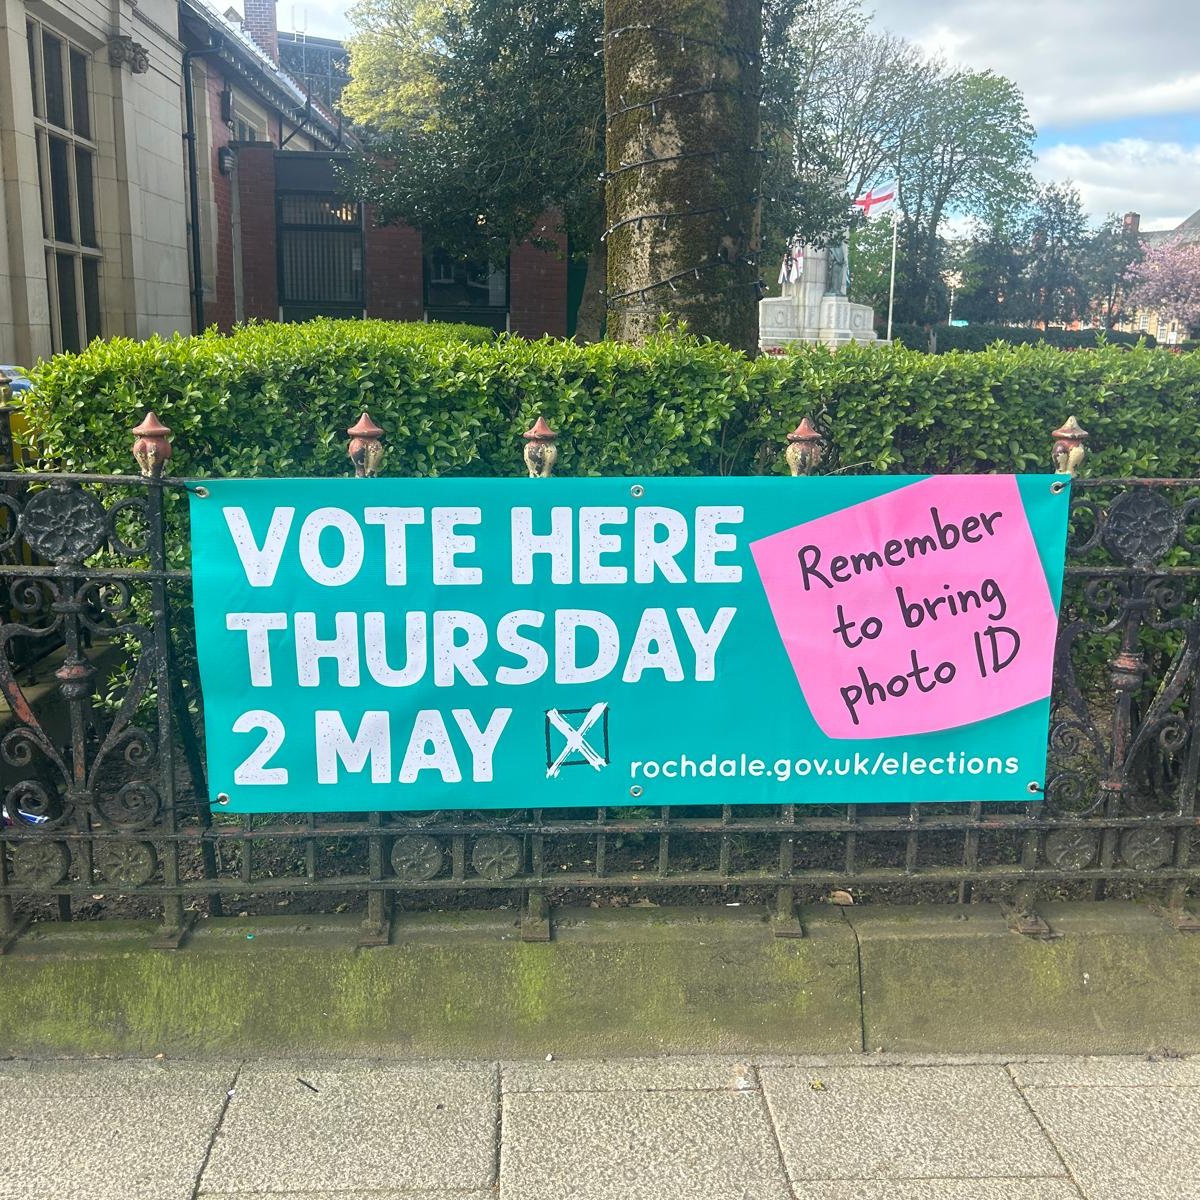 Polling stations open 7am - 10pm on Thursday (2 May) for the local and GMCA Mayoral elections. Remember you need photo ID to vote at a polling station. Find out more at rochdale.gov.uk/elections #GMElects #HeyMiddElections #RochdaleElections 🗳️